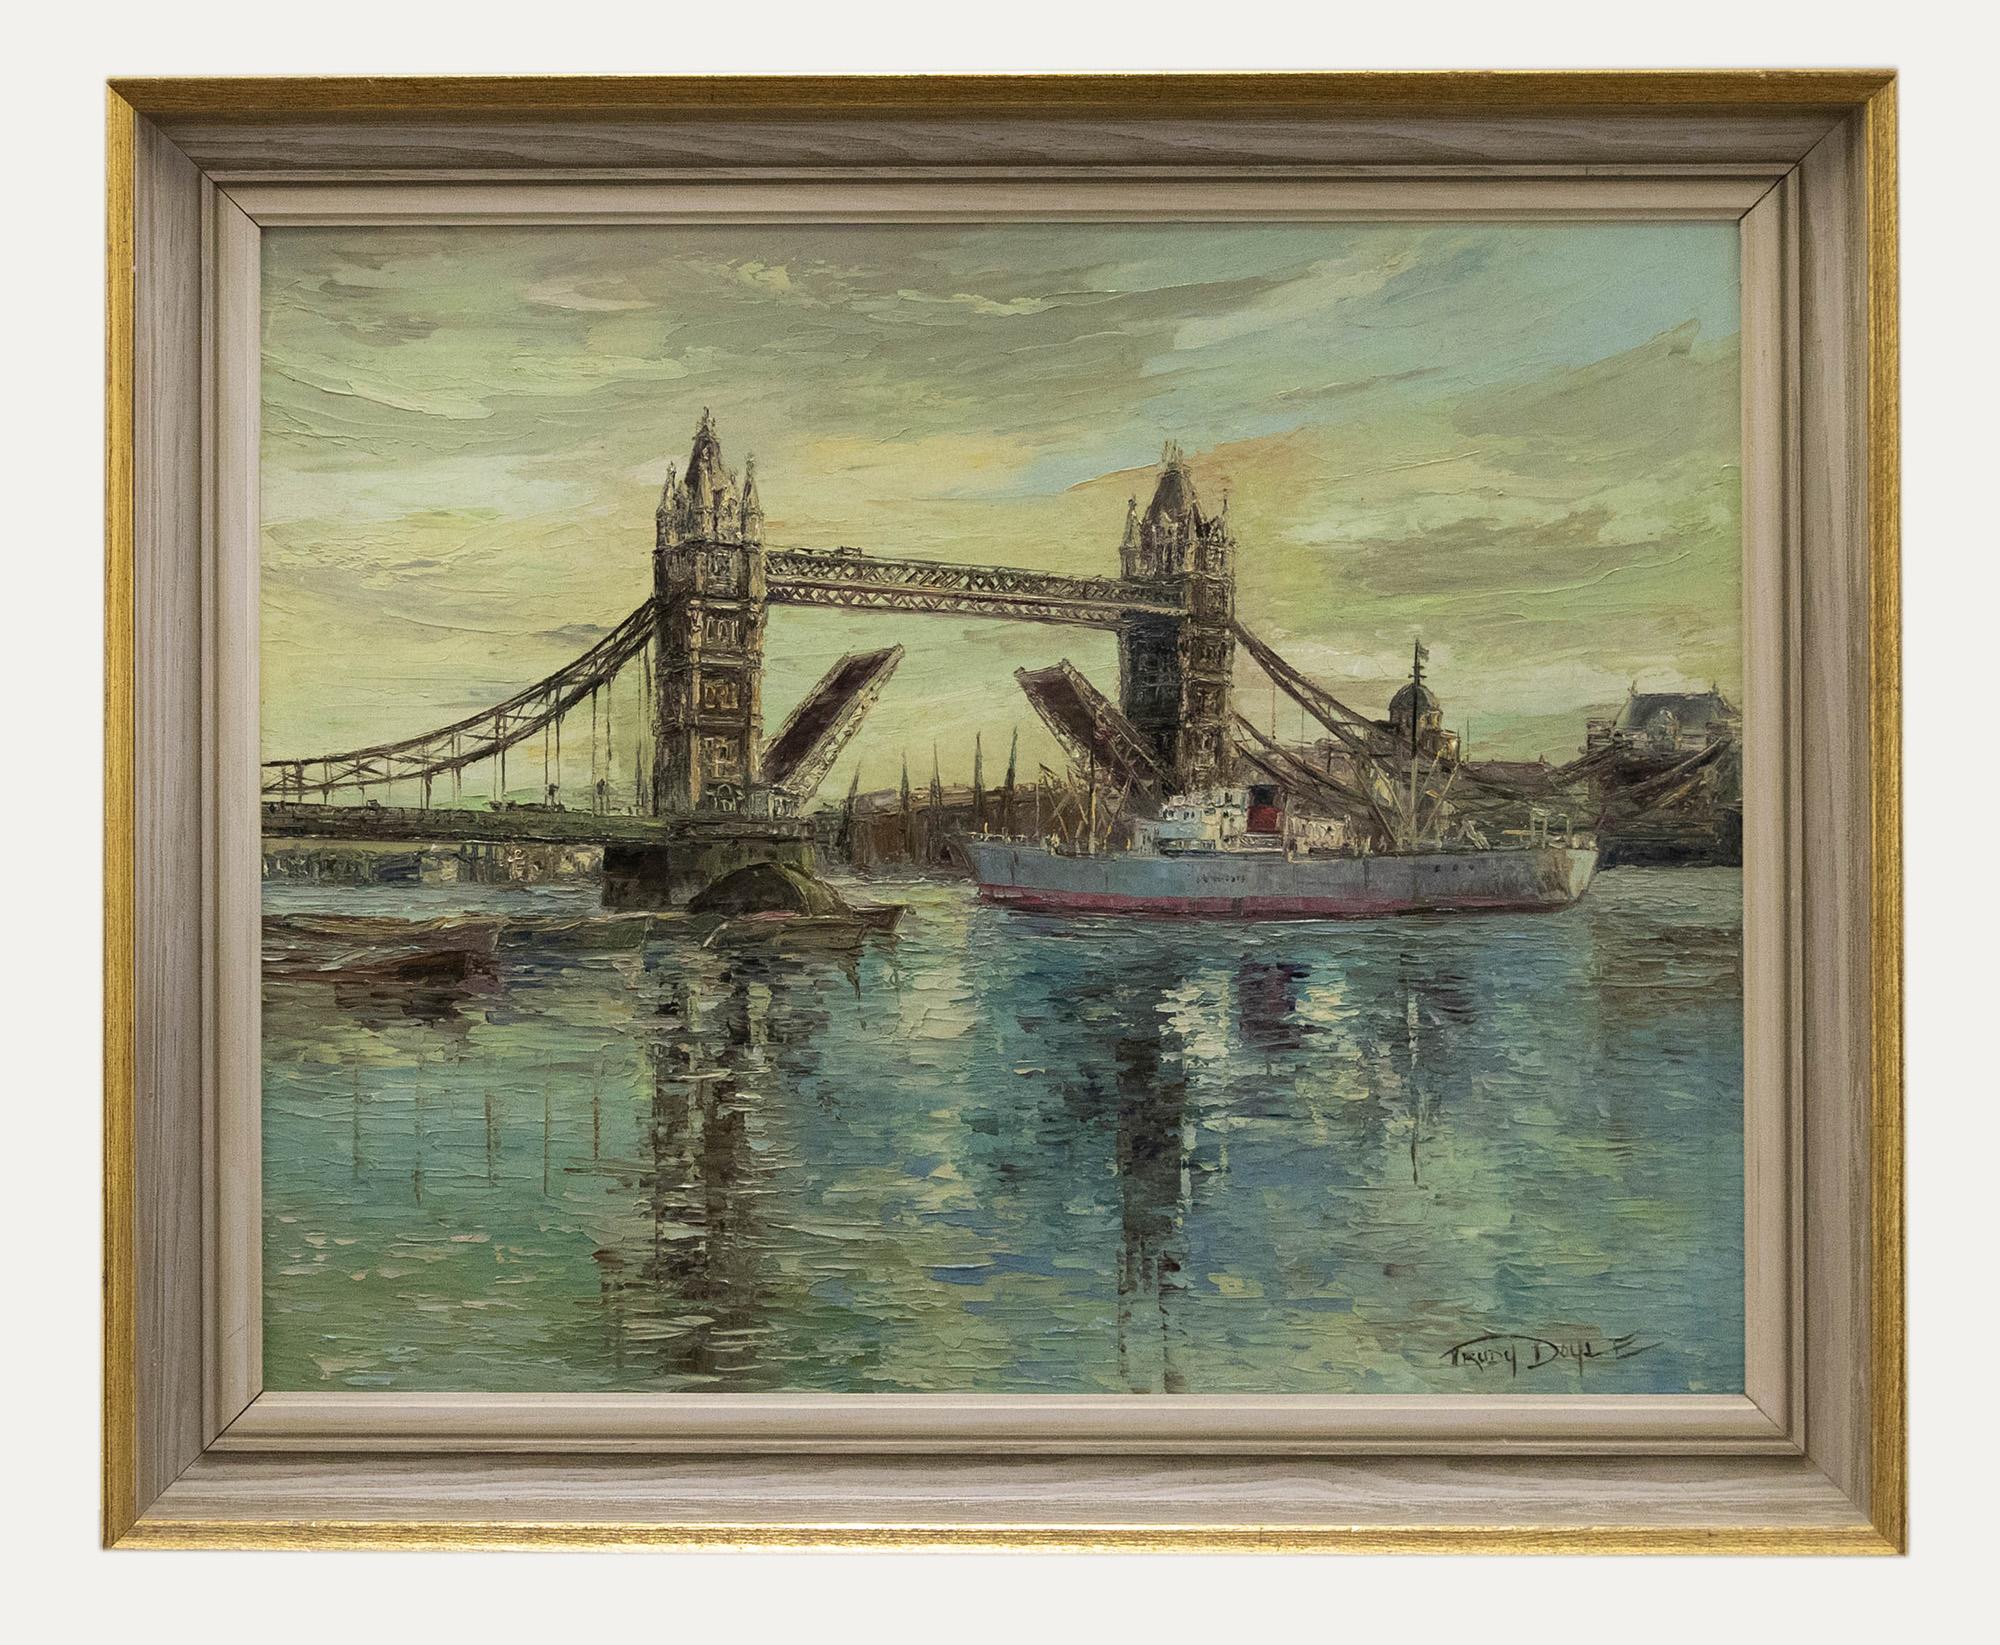 Unknown Landscape Painting - Trudy Doyle - Framed Mid 20th Century Oil, Tower Bridge